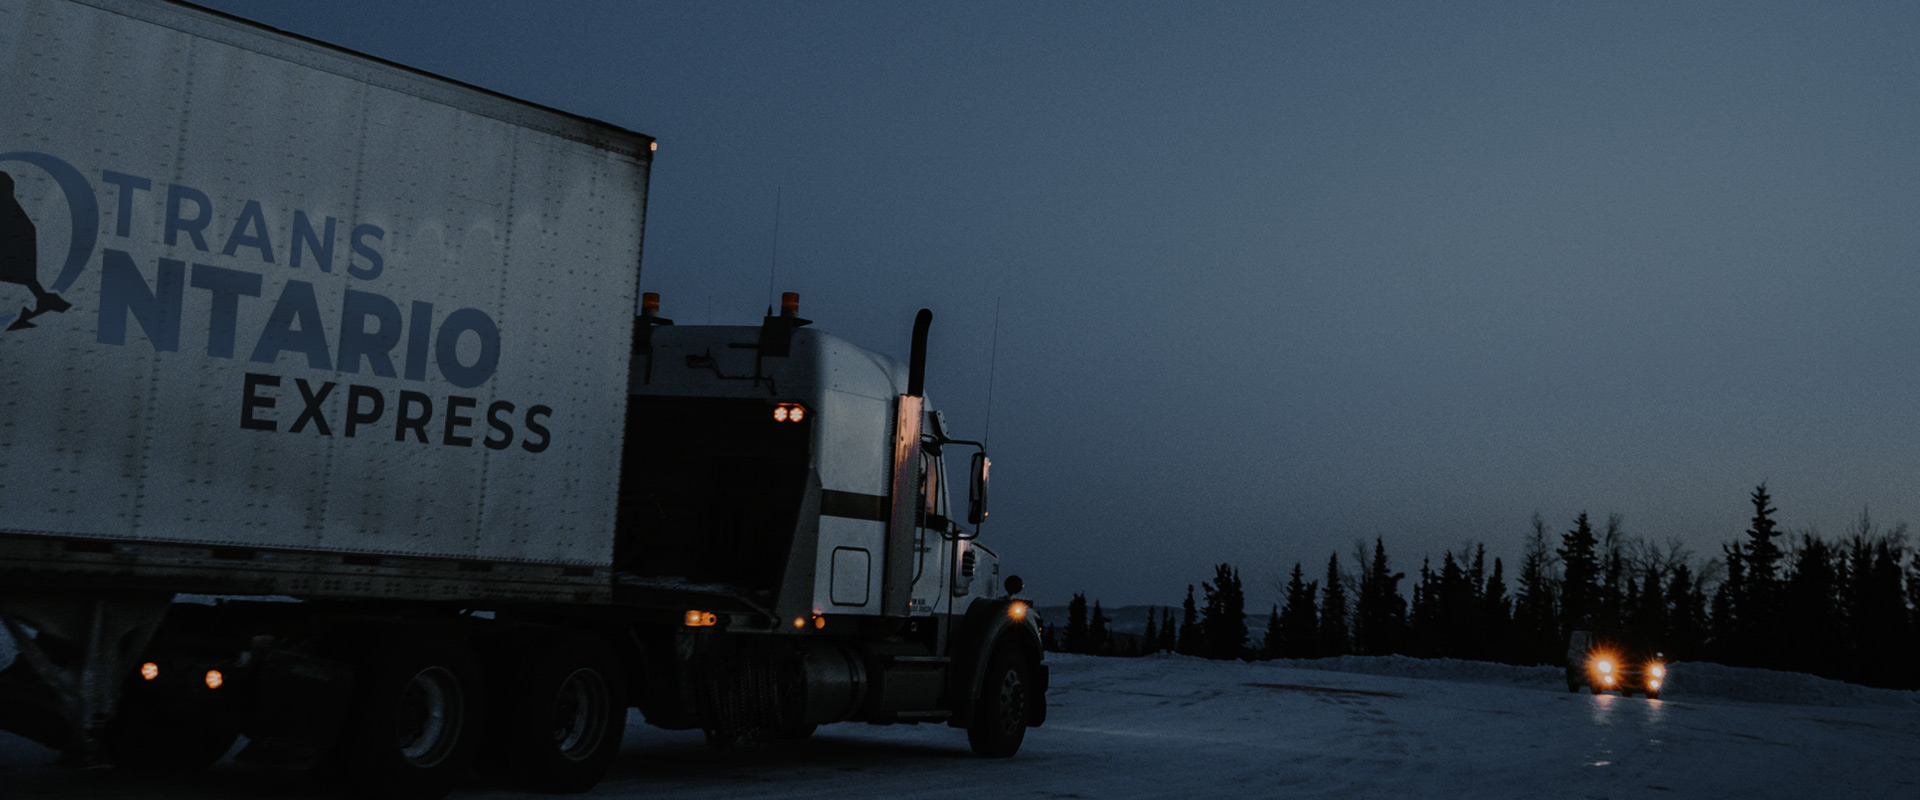 header image for fleet page of a trans ontario truck